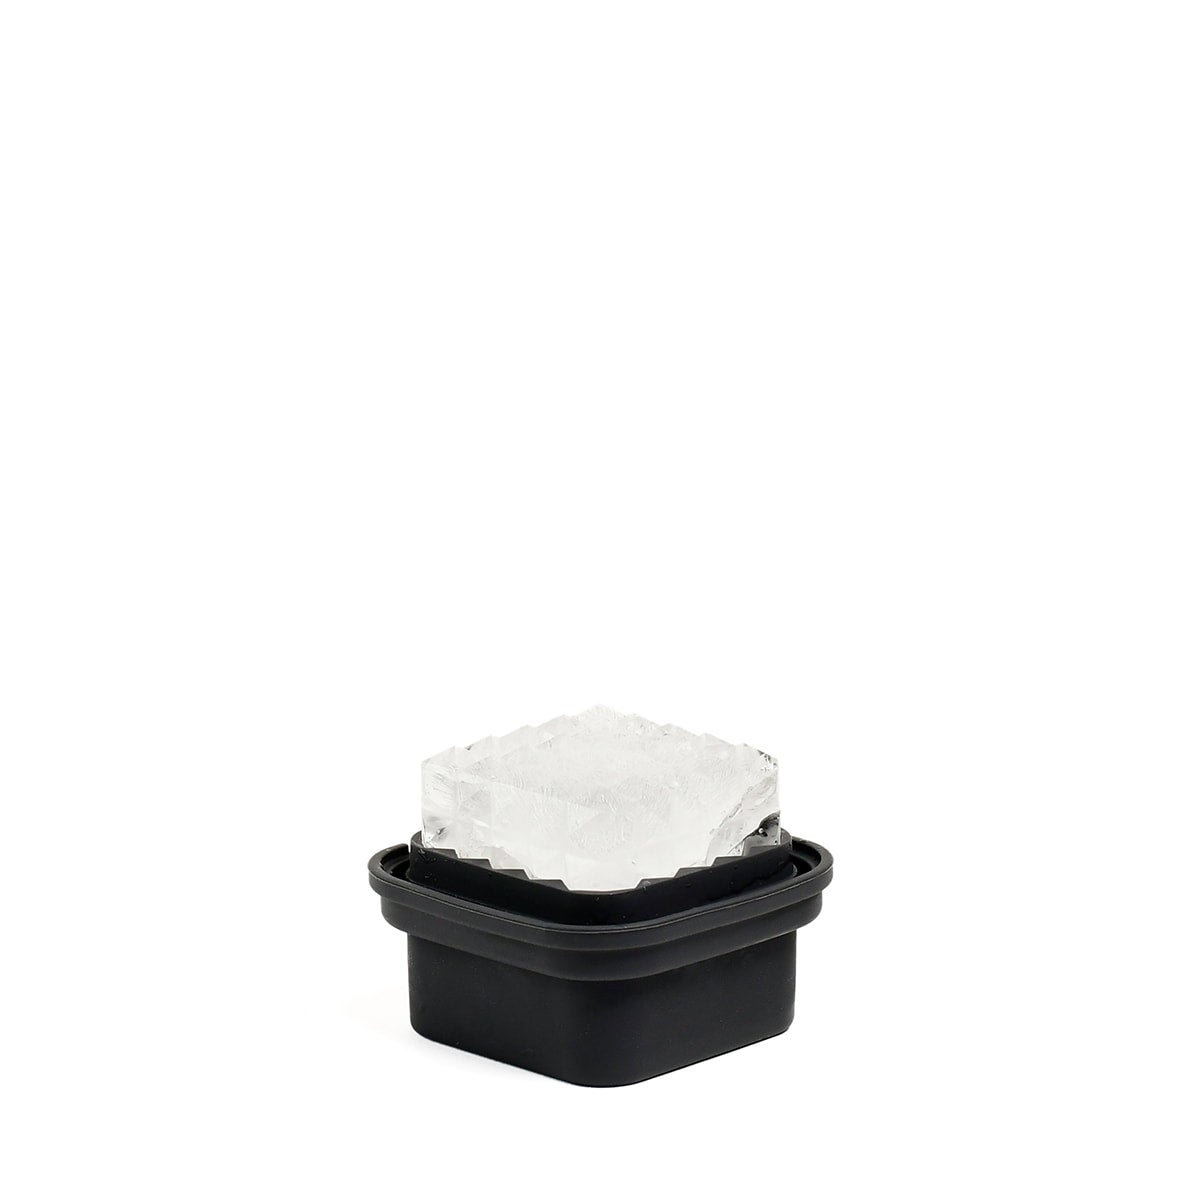 PEAK - PRISM COCKTAIL ICE MOLD - CHARCOAL